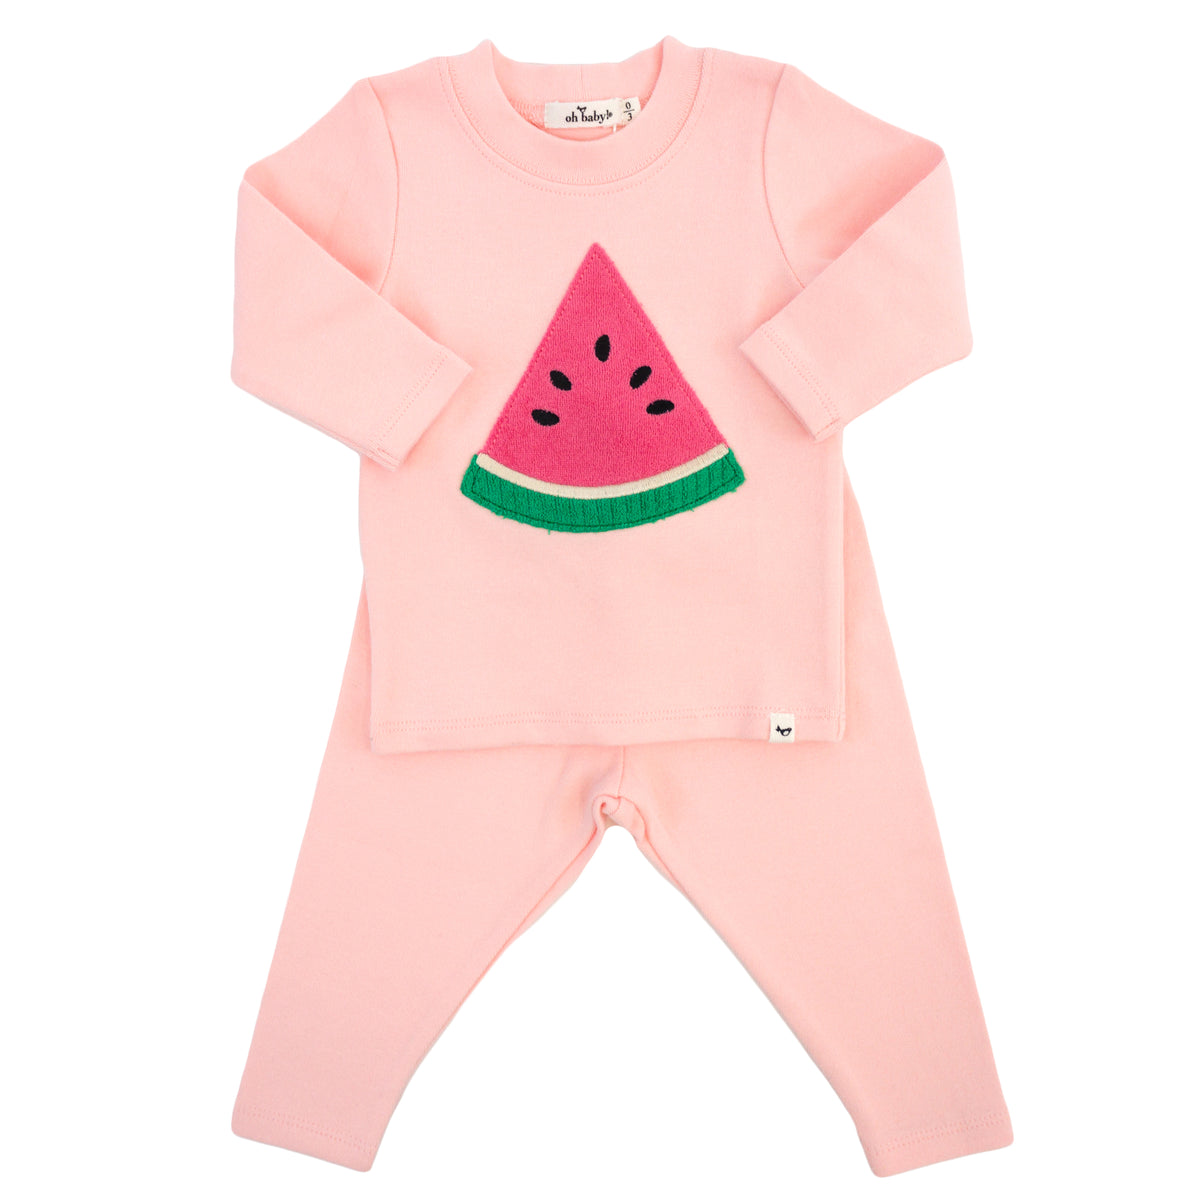 oh baby! Two Piece Set - Watermelon Applique - Pale Pink